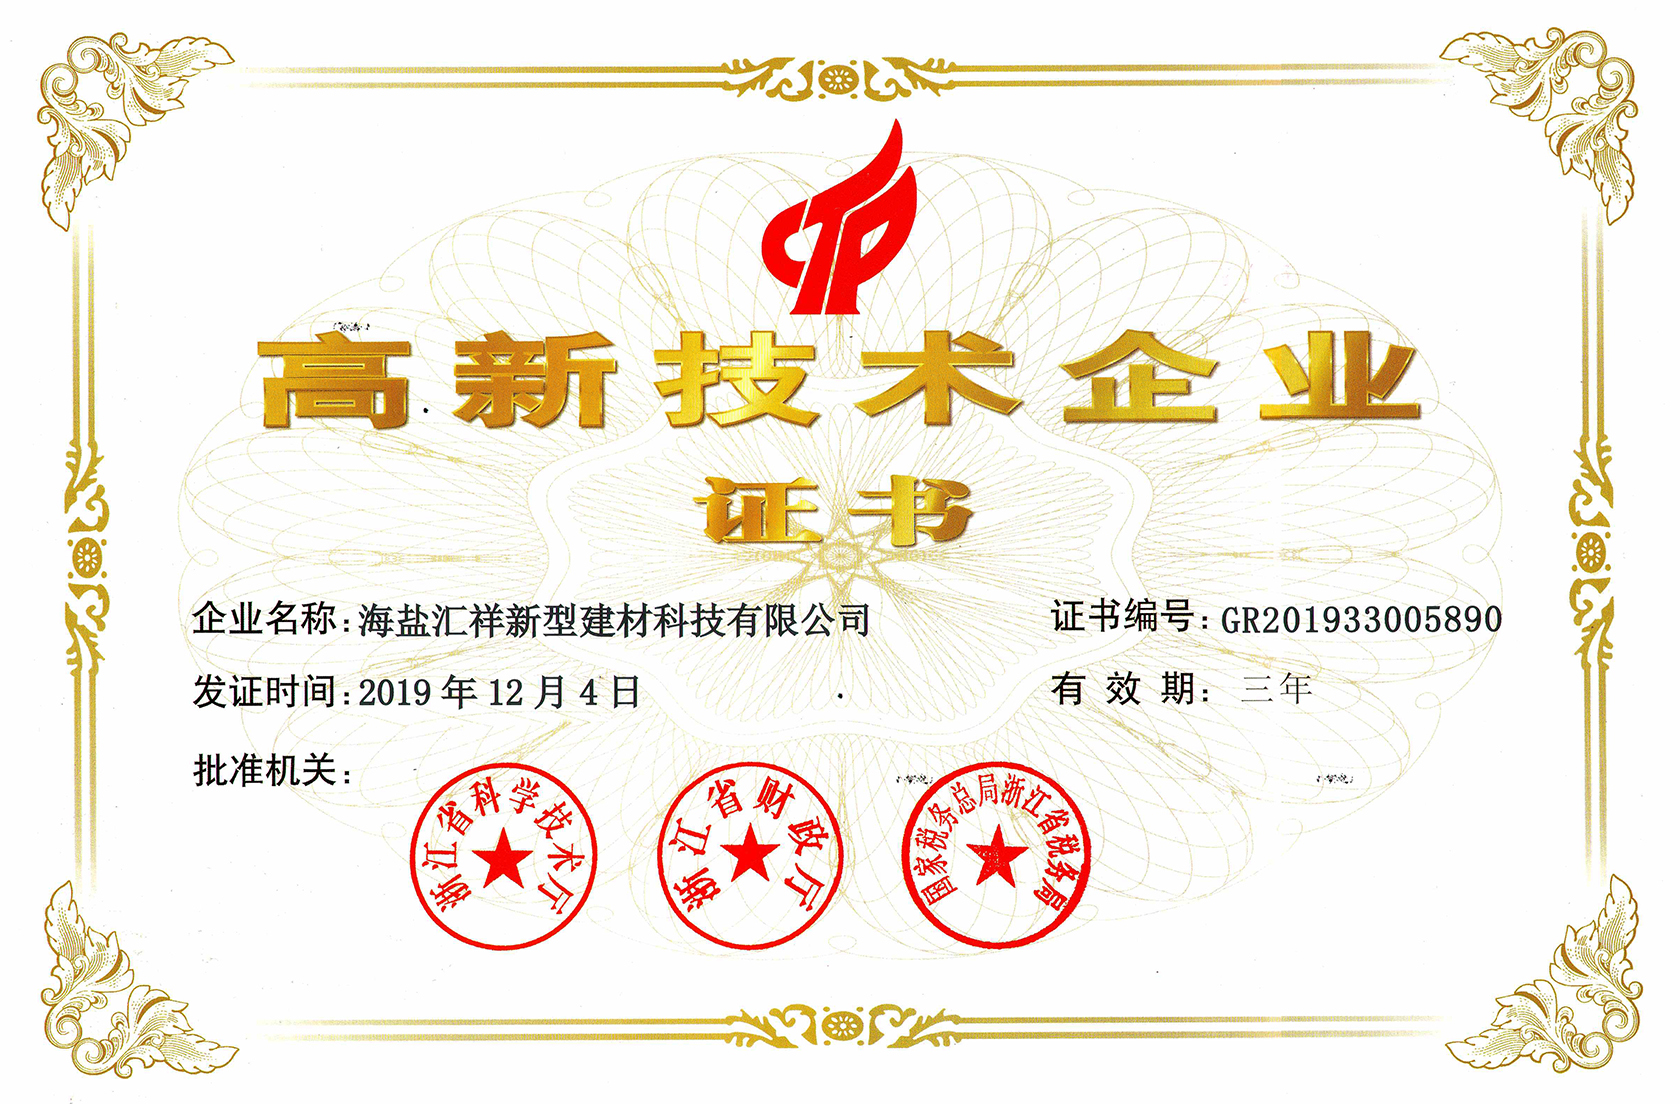 In December 2019, it will obtain the certificate of high tech enterprise